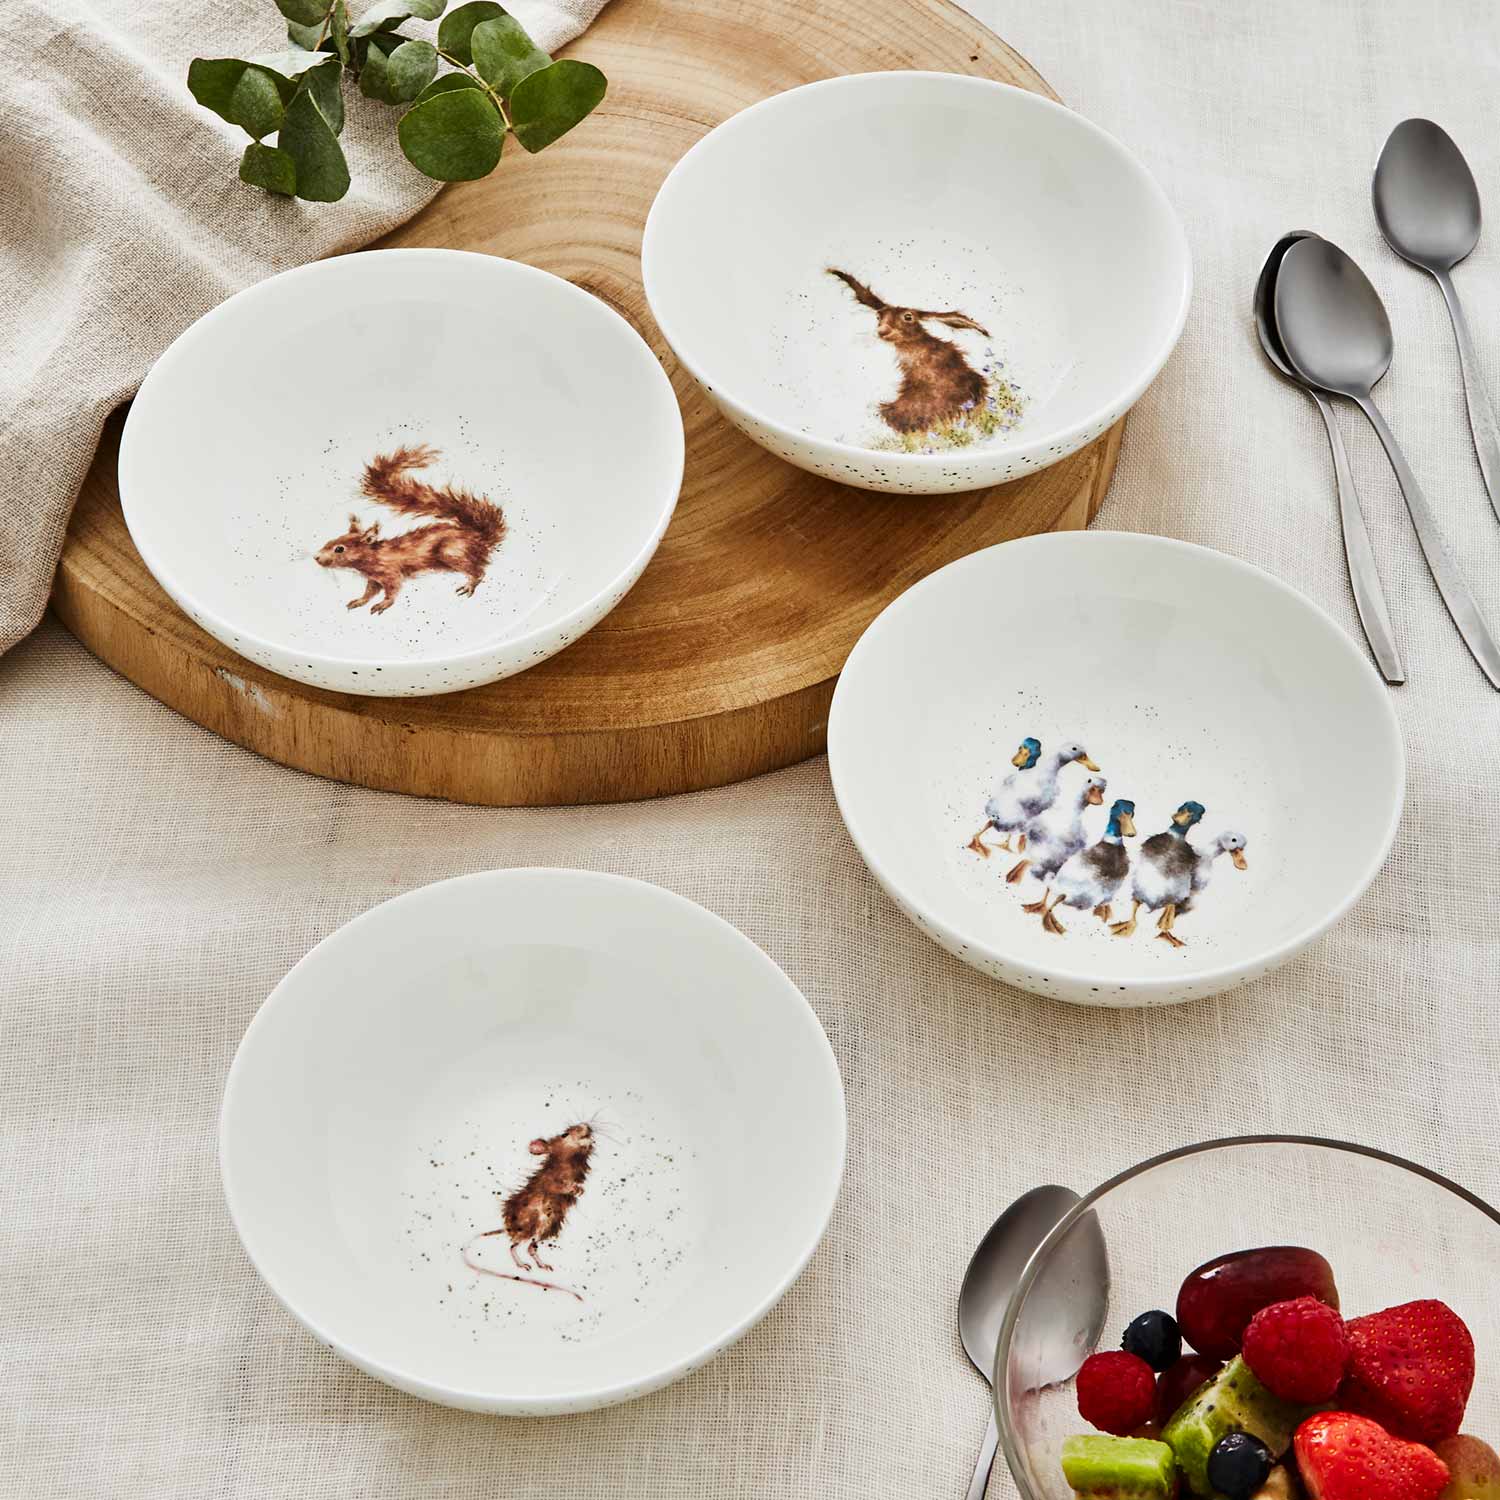 Cereal Bowl Set of 4 (Assorted) image number null